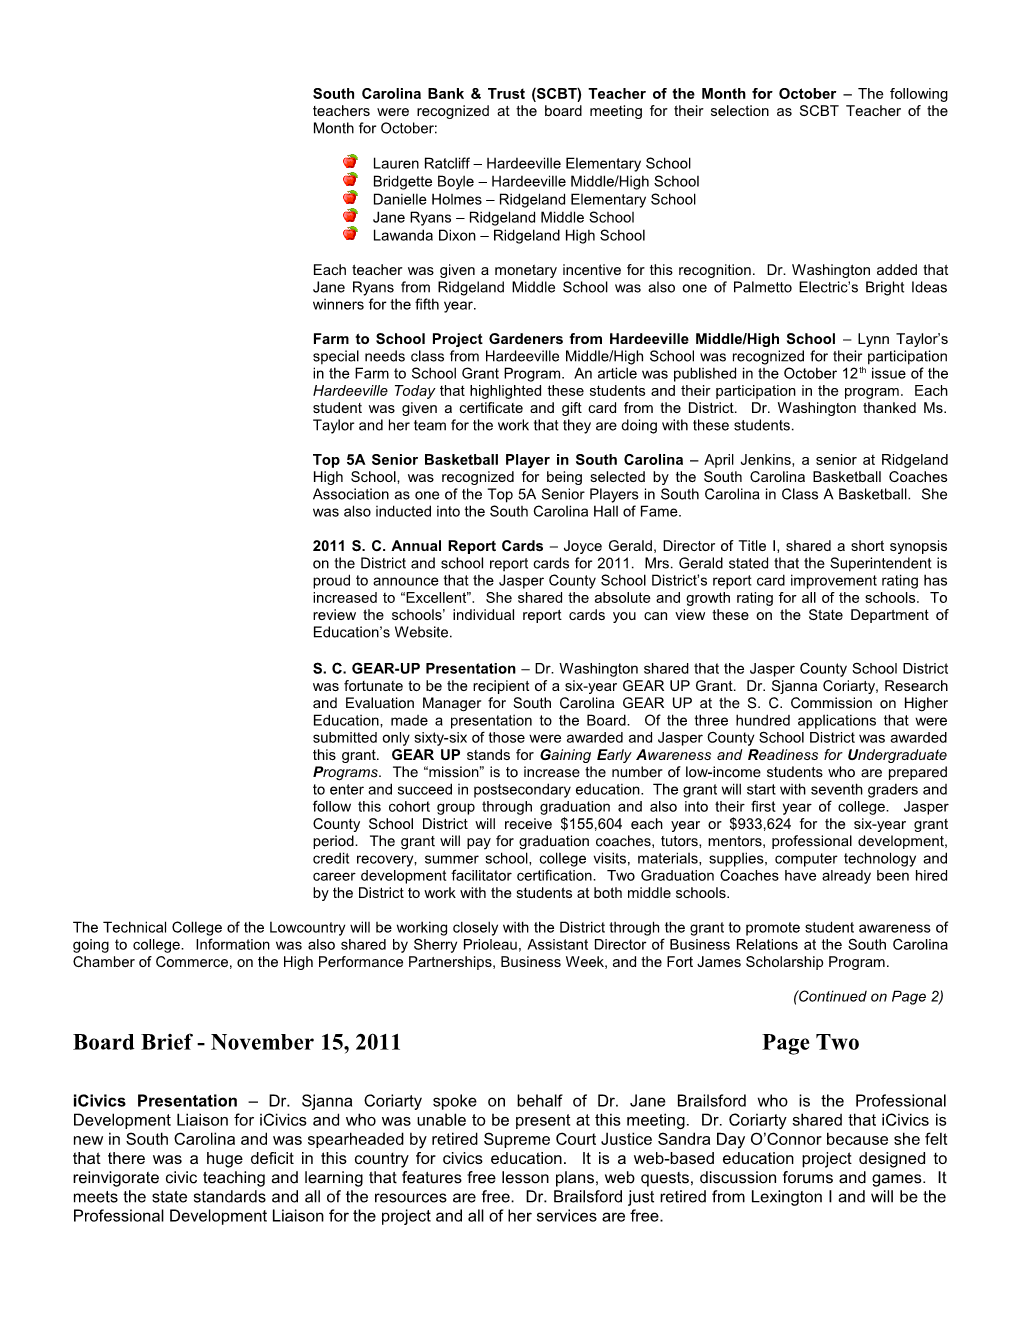 This Publication Is Designed to Share the Actions from the November 14, 2011 Board Meeting